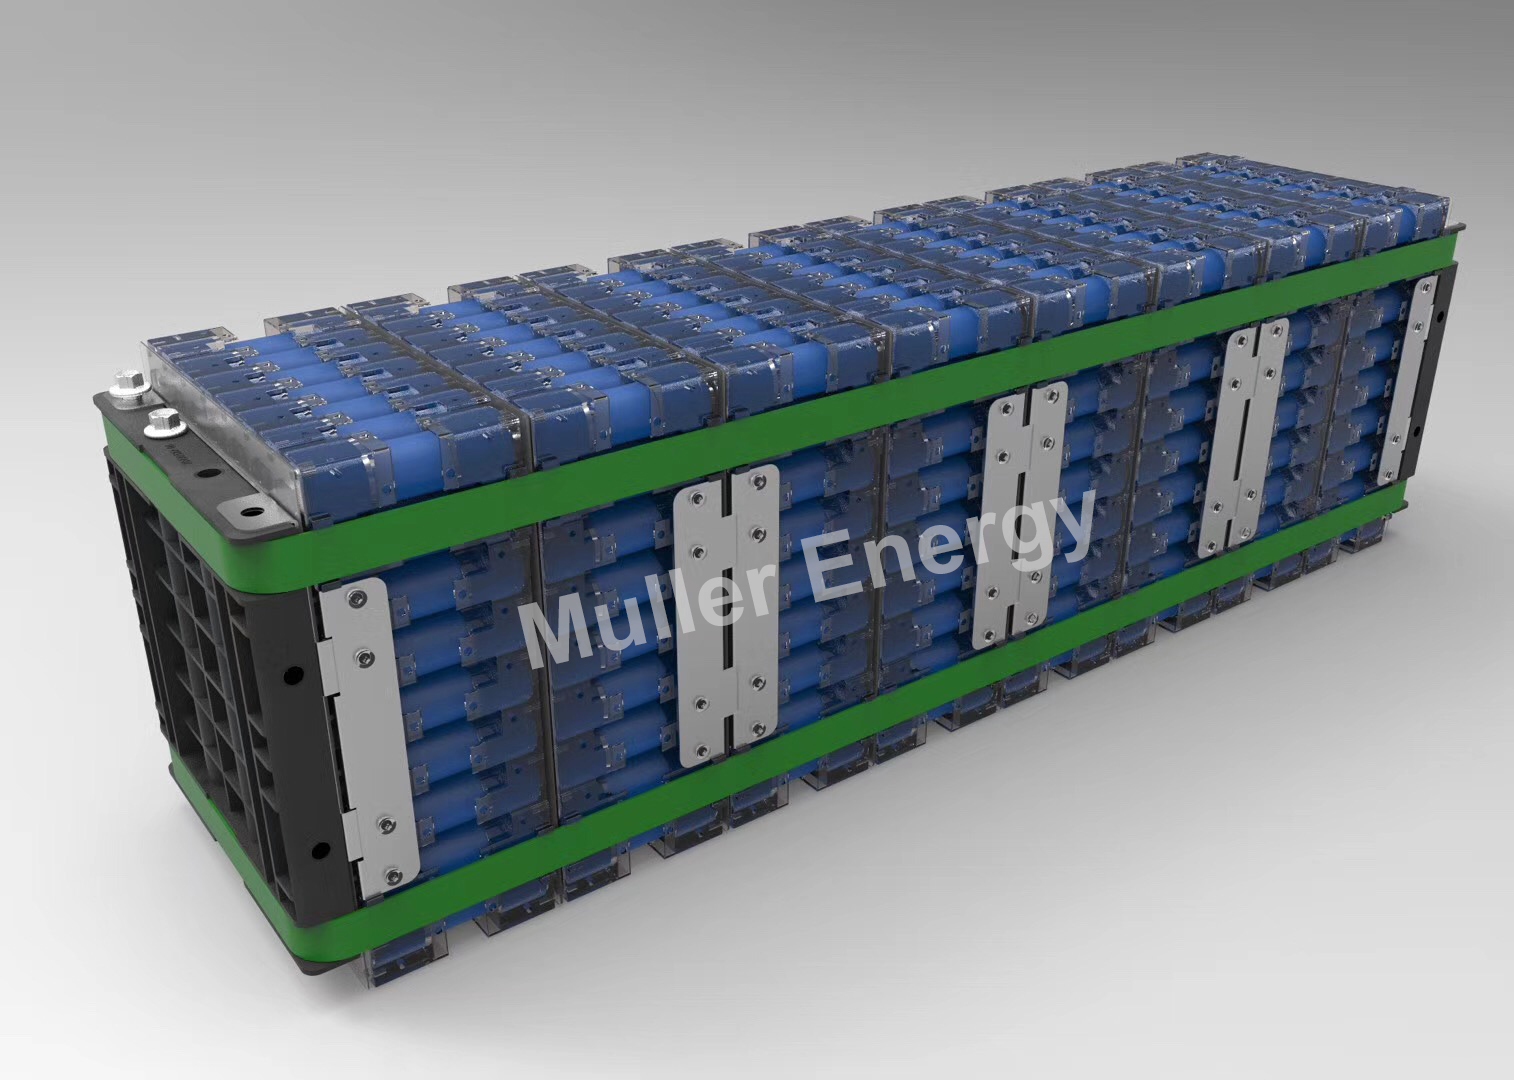 MULLER ENERGY Lithiumion battery pack